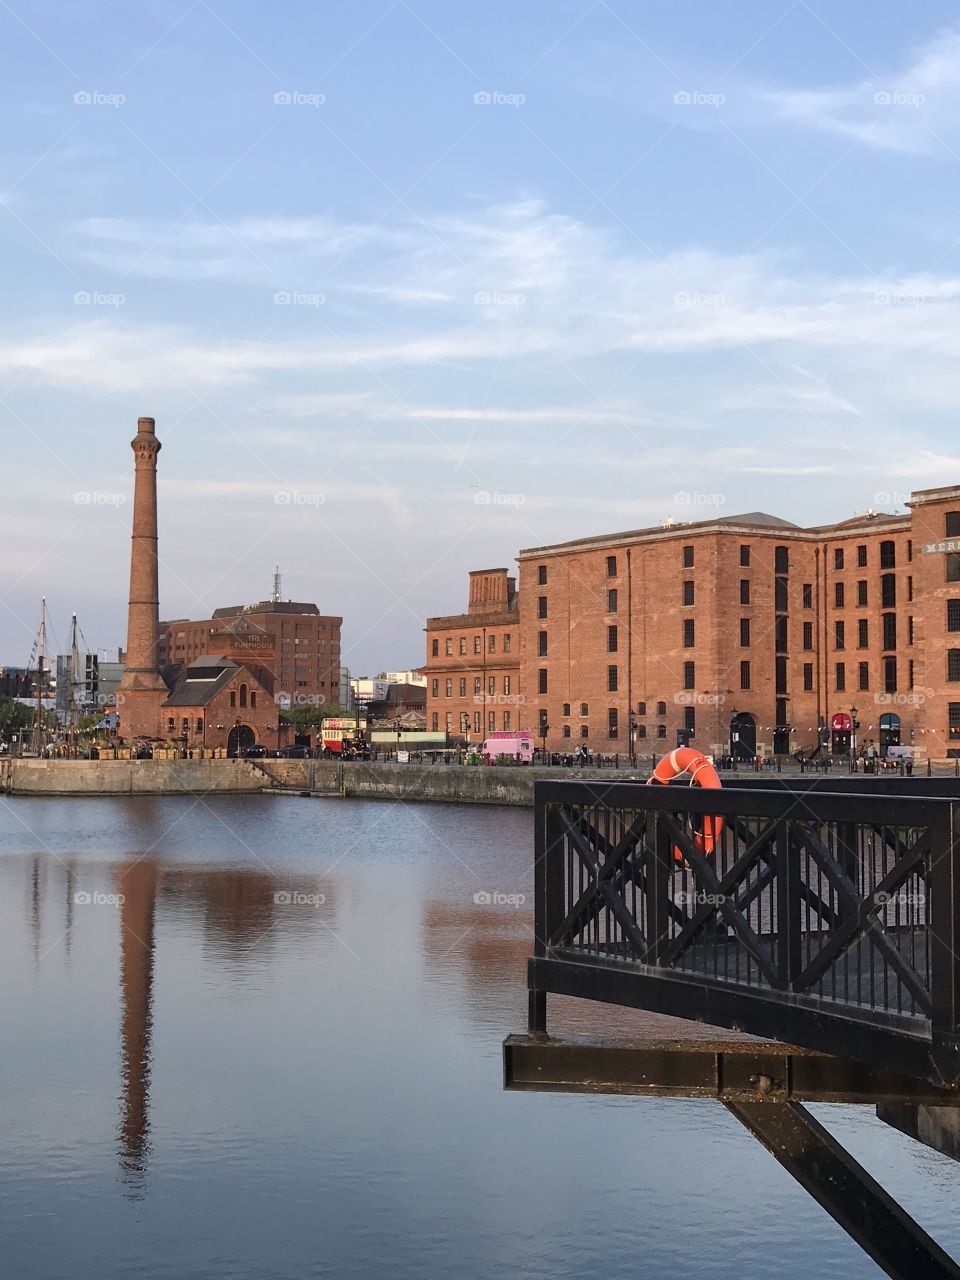 The vibrant heart of liverpool's historic waterfront, the Albert Dock's the place to play, to see, to eat, drink and stay. Blending old and new, it's contemporary, yet.